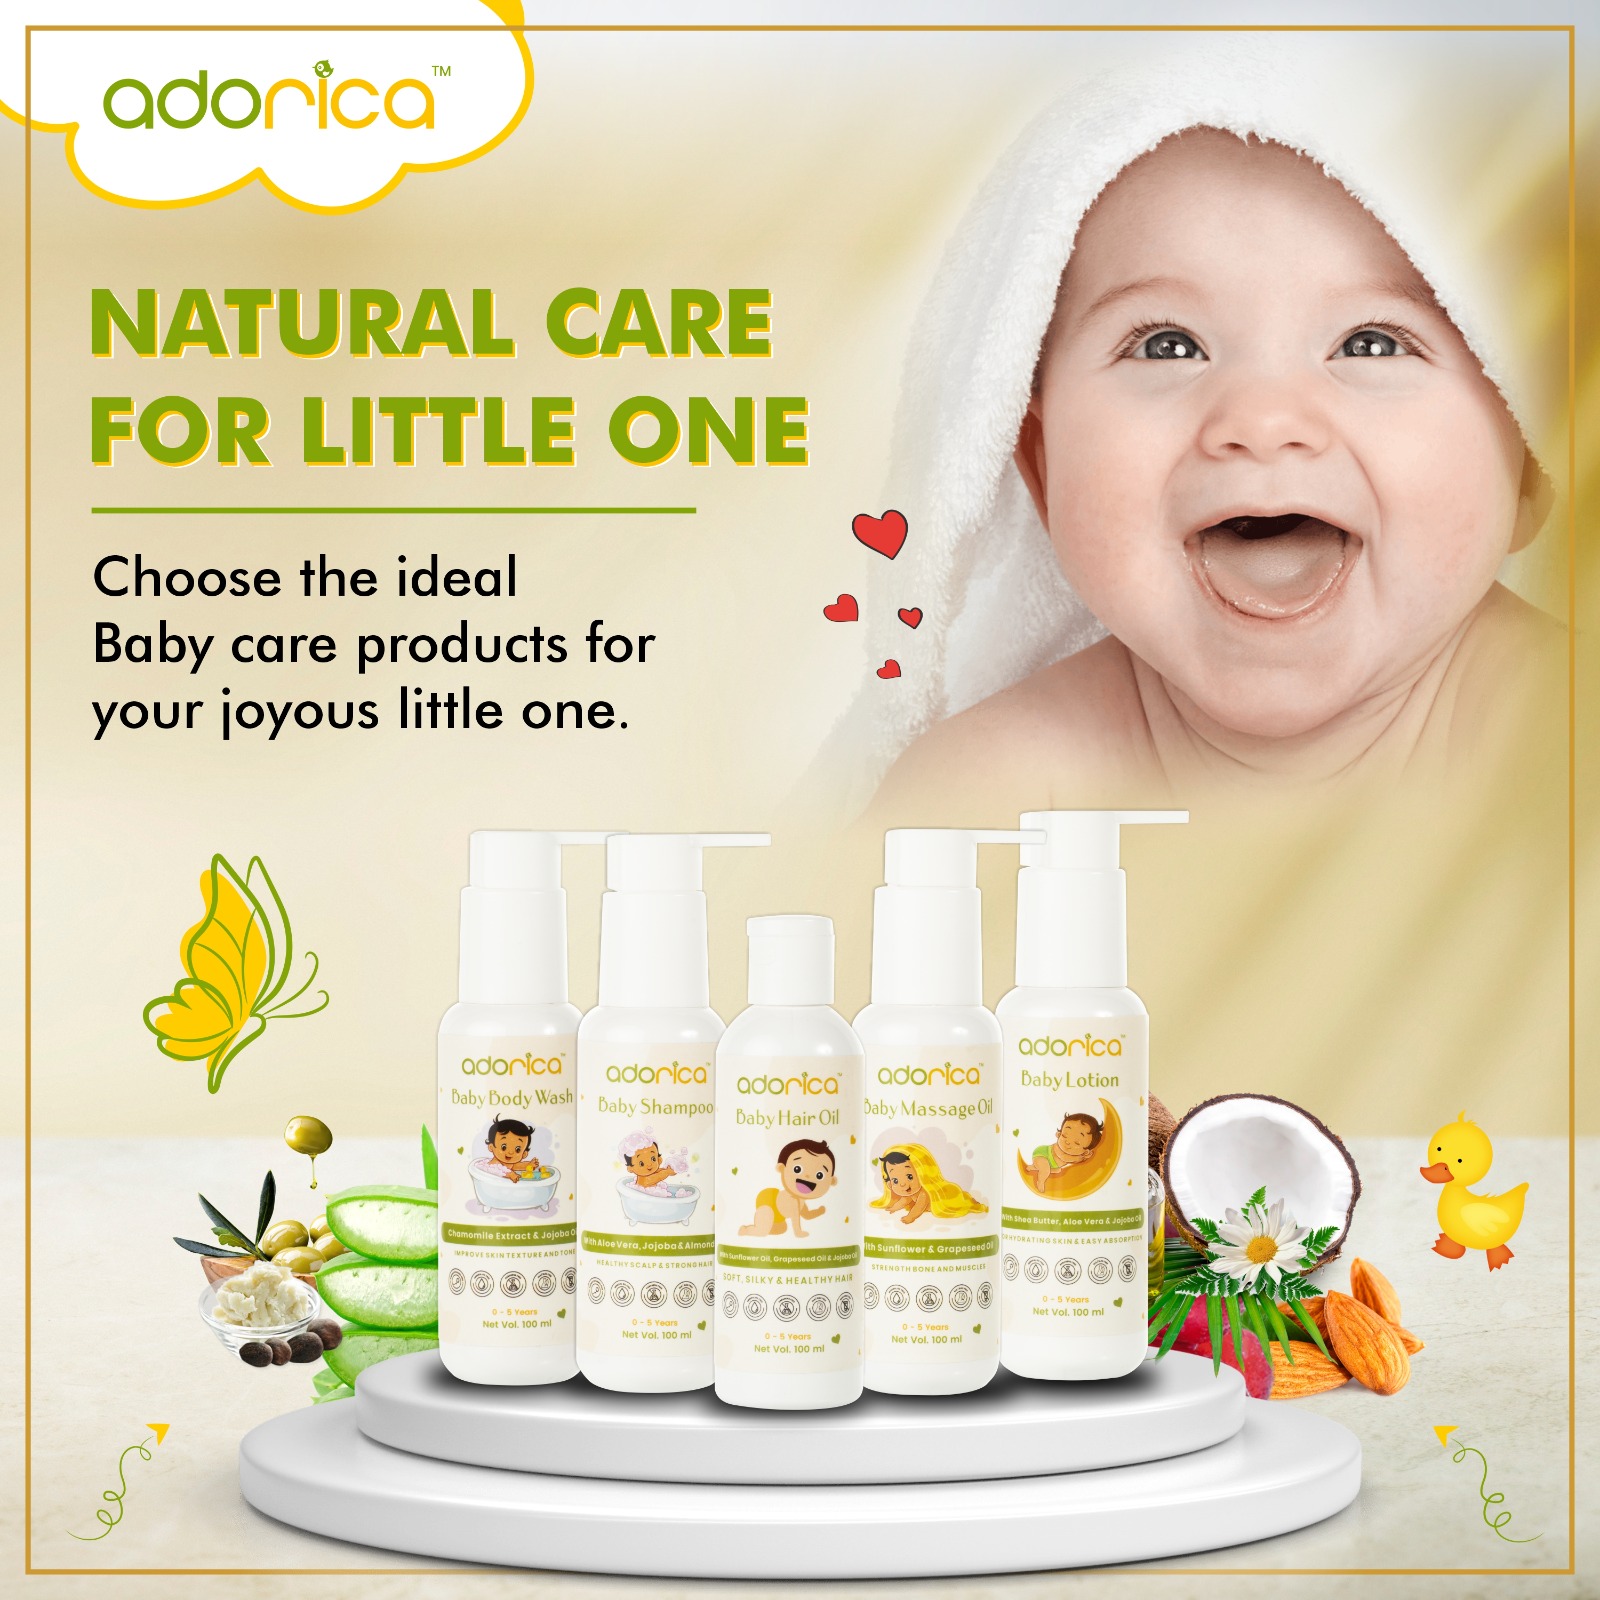 Adorica Care launches its baby care products range for Indian Market